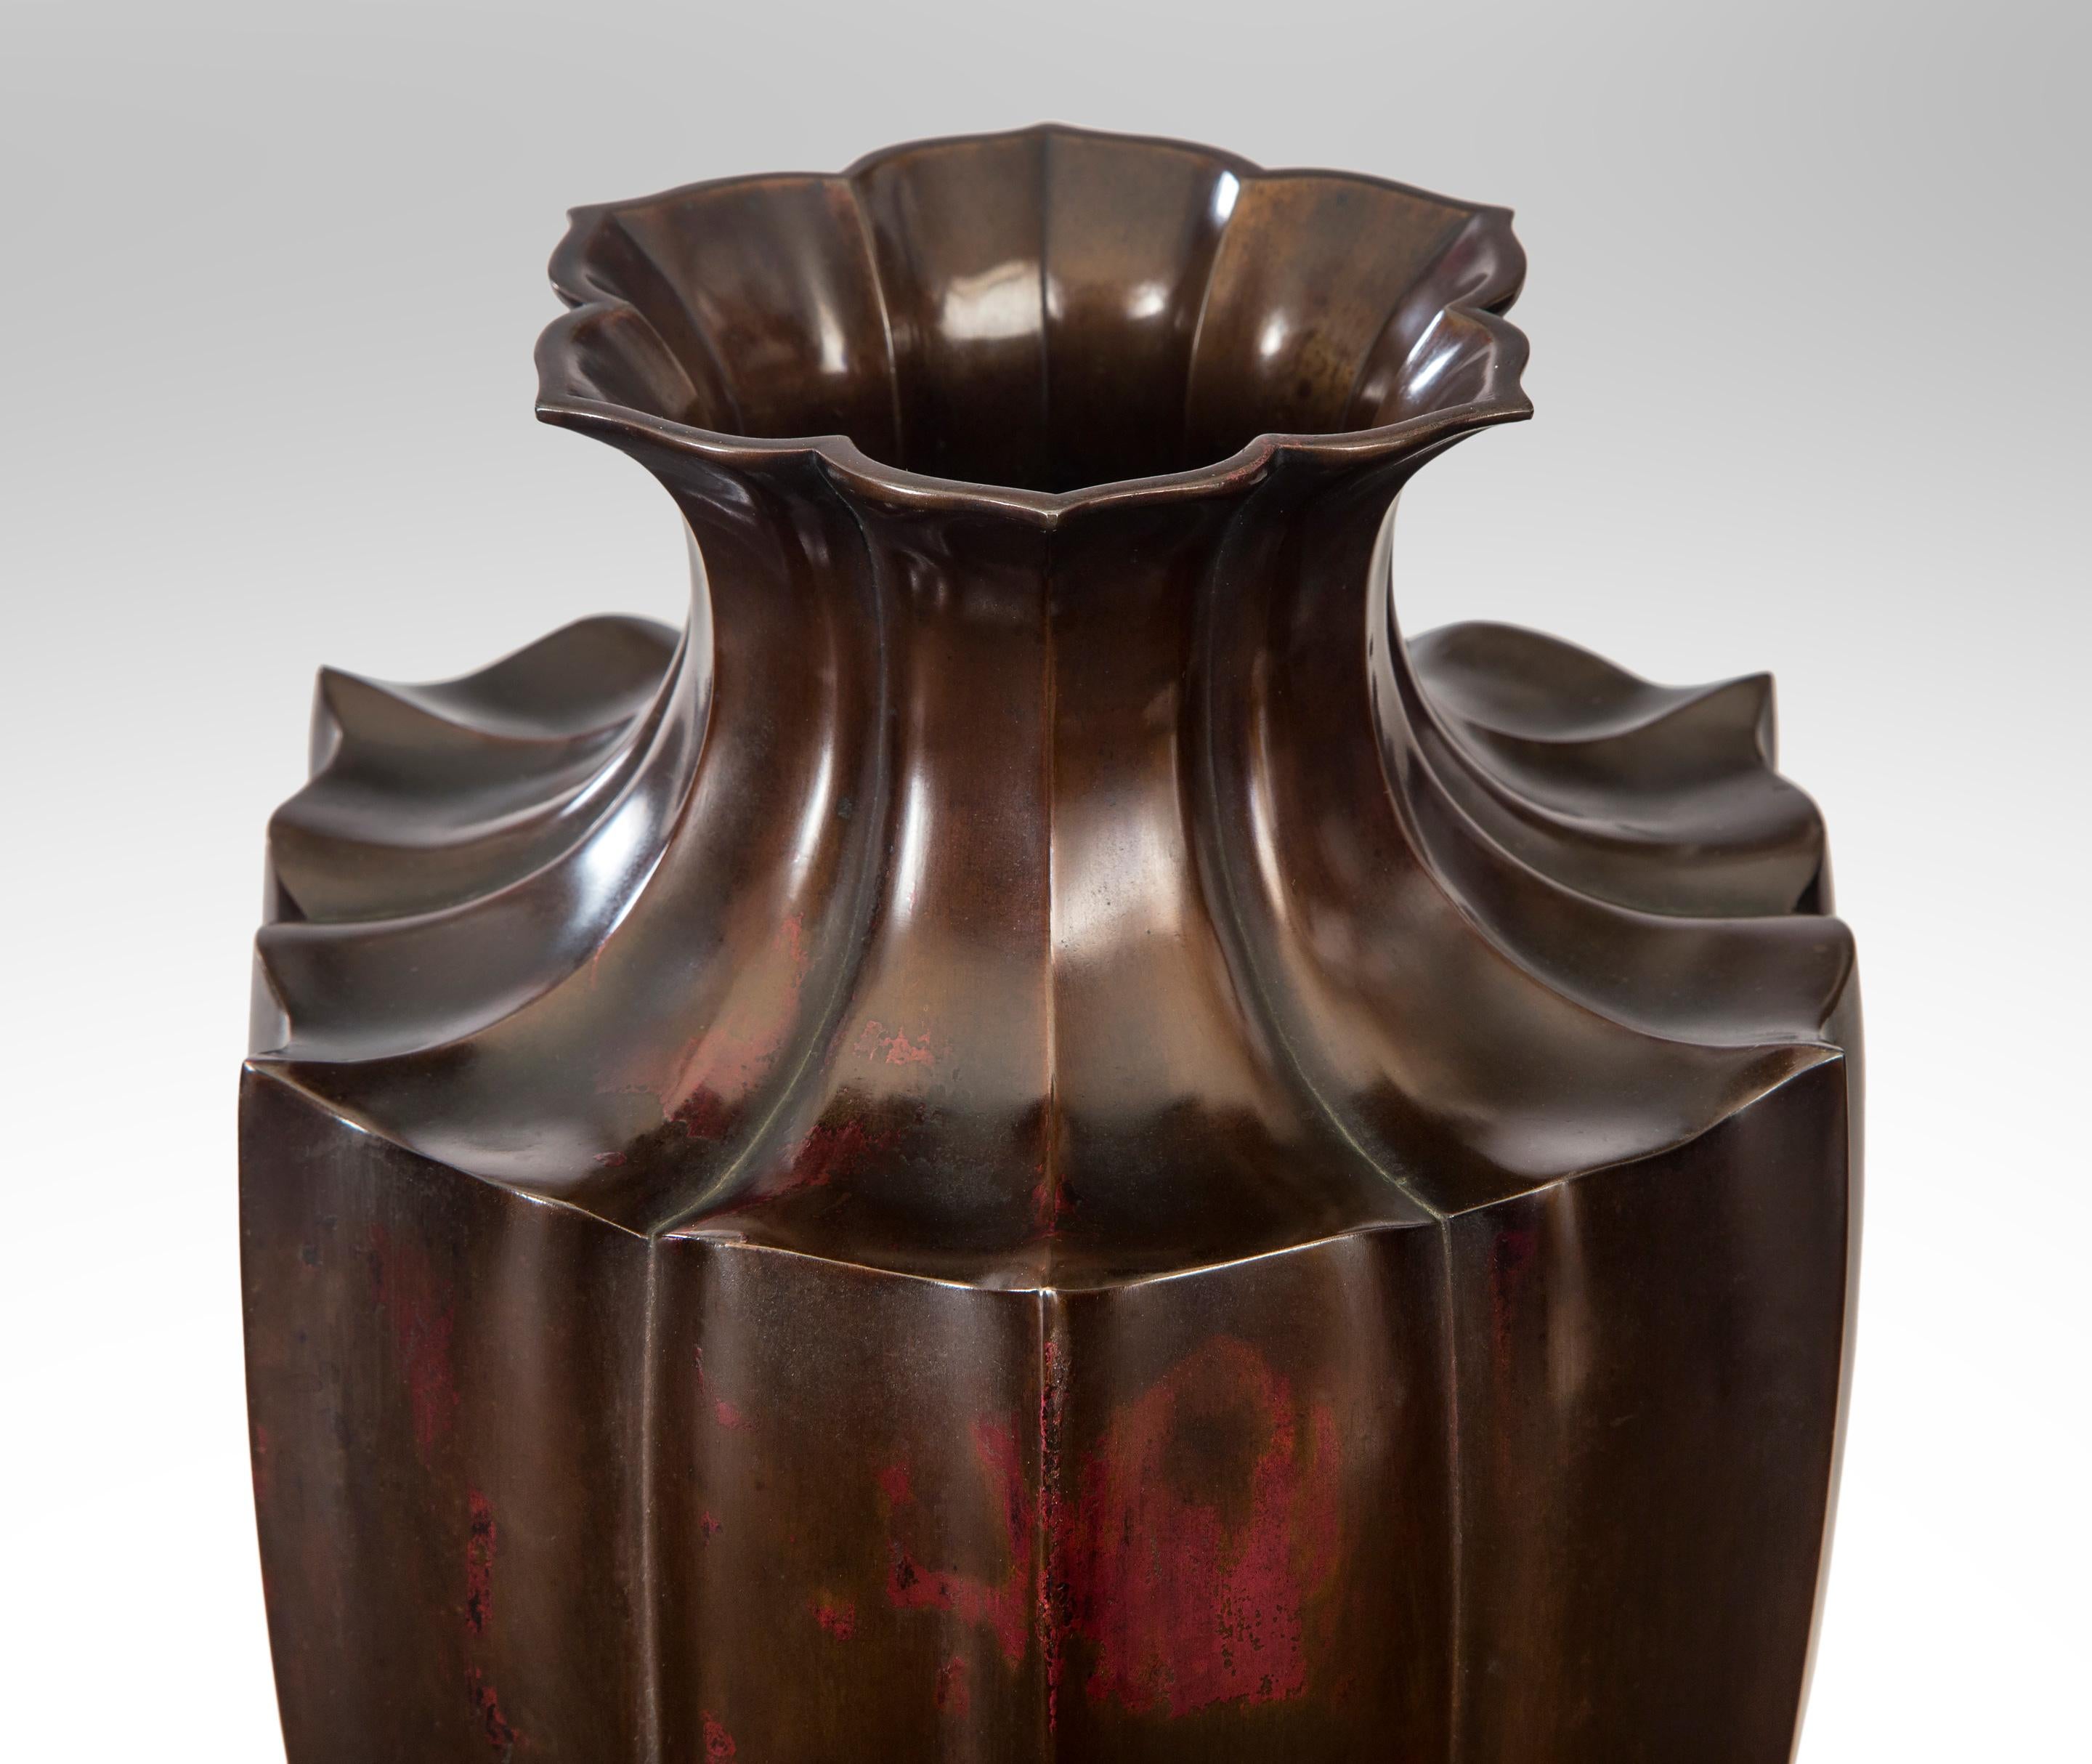 An exceptional Japanese patinated bronze Lotus flower vase.
Edo or Meiji 19th century
The complex form and significant scale of this extraordinary, tall vase is an important example of Japanese metal work at its finest. The hexagonal lobed neck